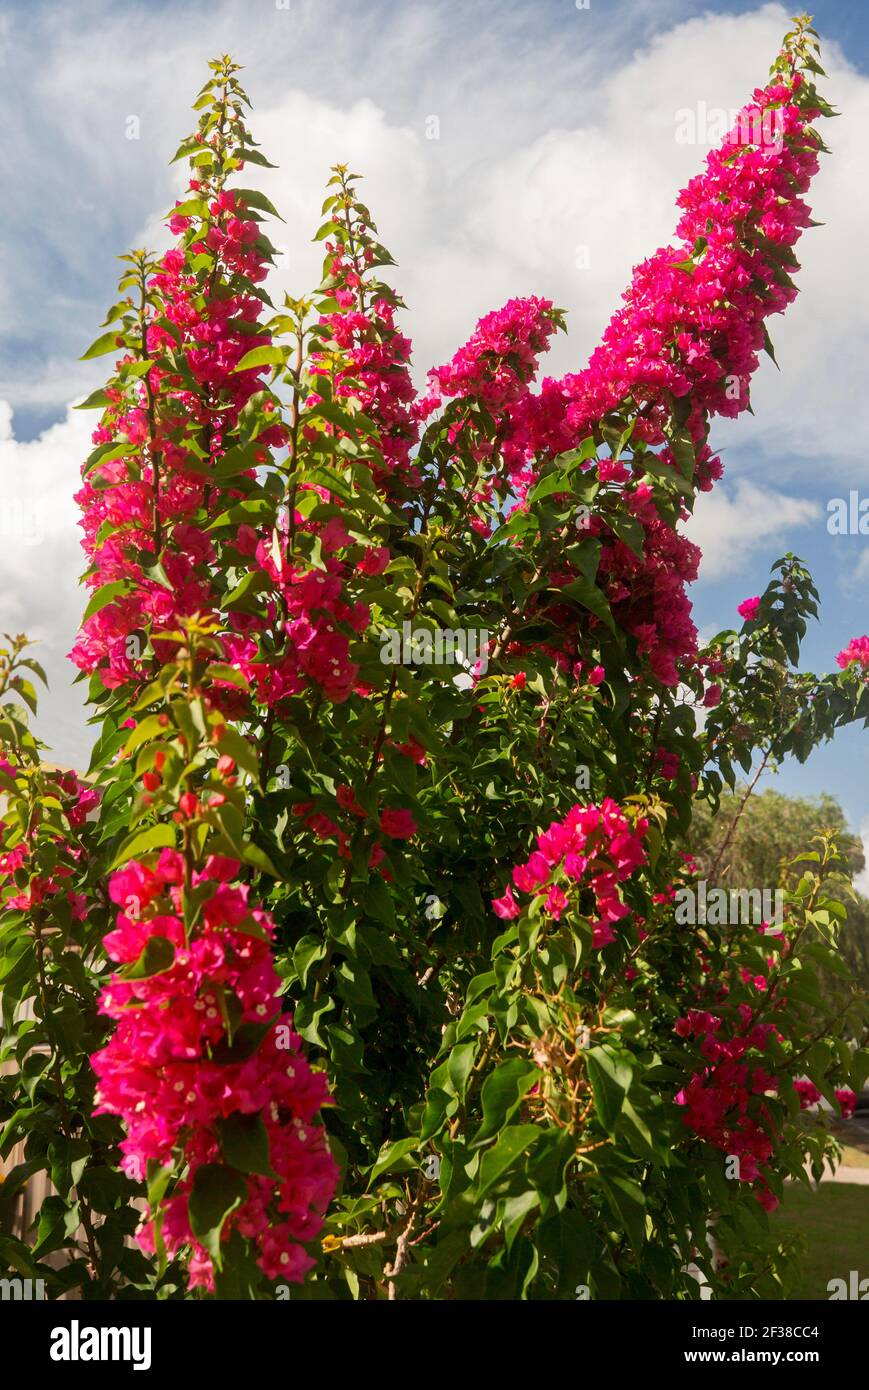 Bougainvillea 'Smartie Pants' with spikes of bright red flower bracts and dark green foliage against background of blue sky Stock Photo